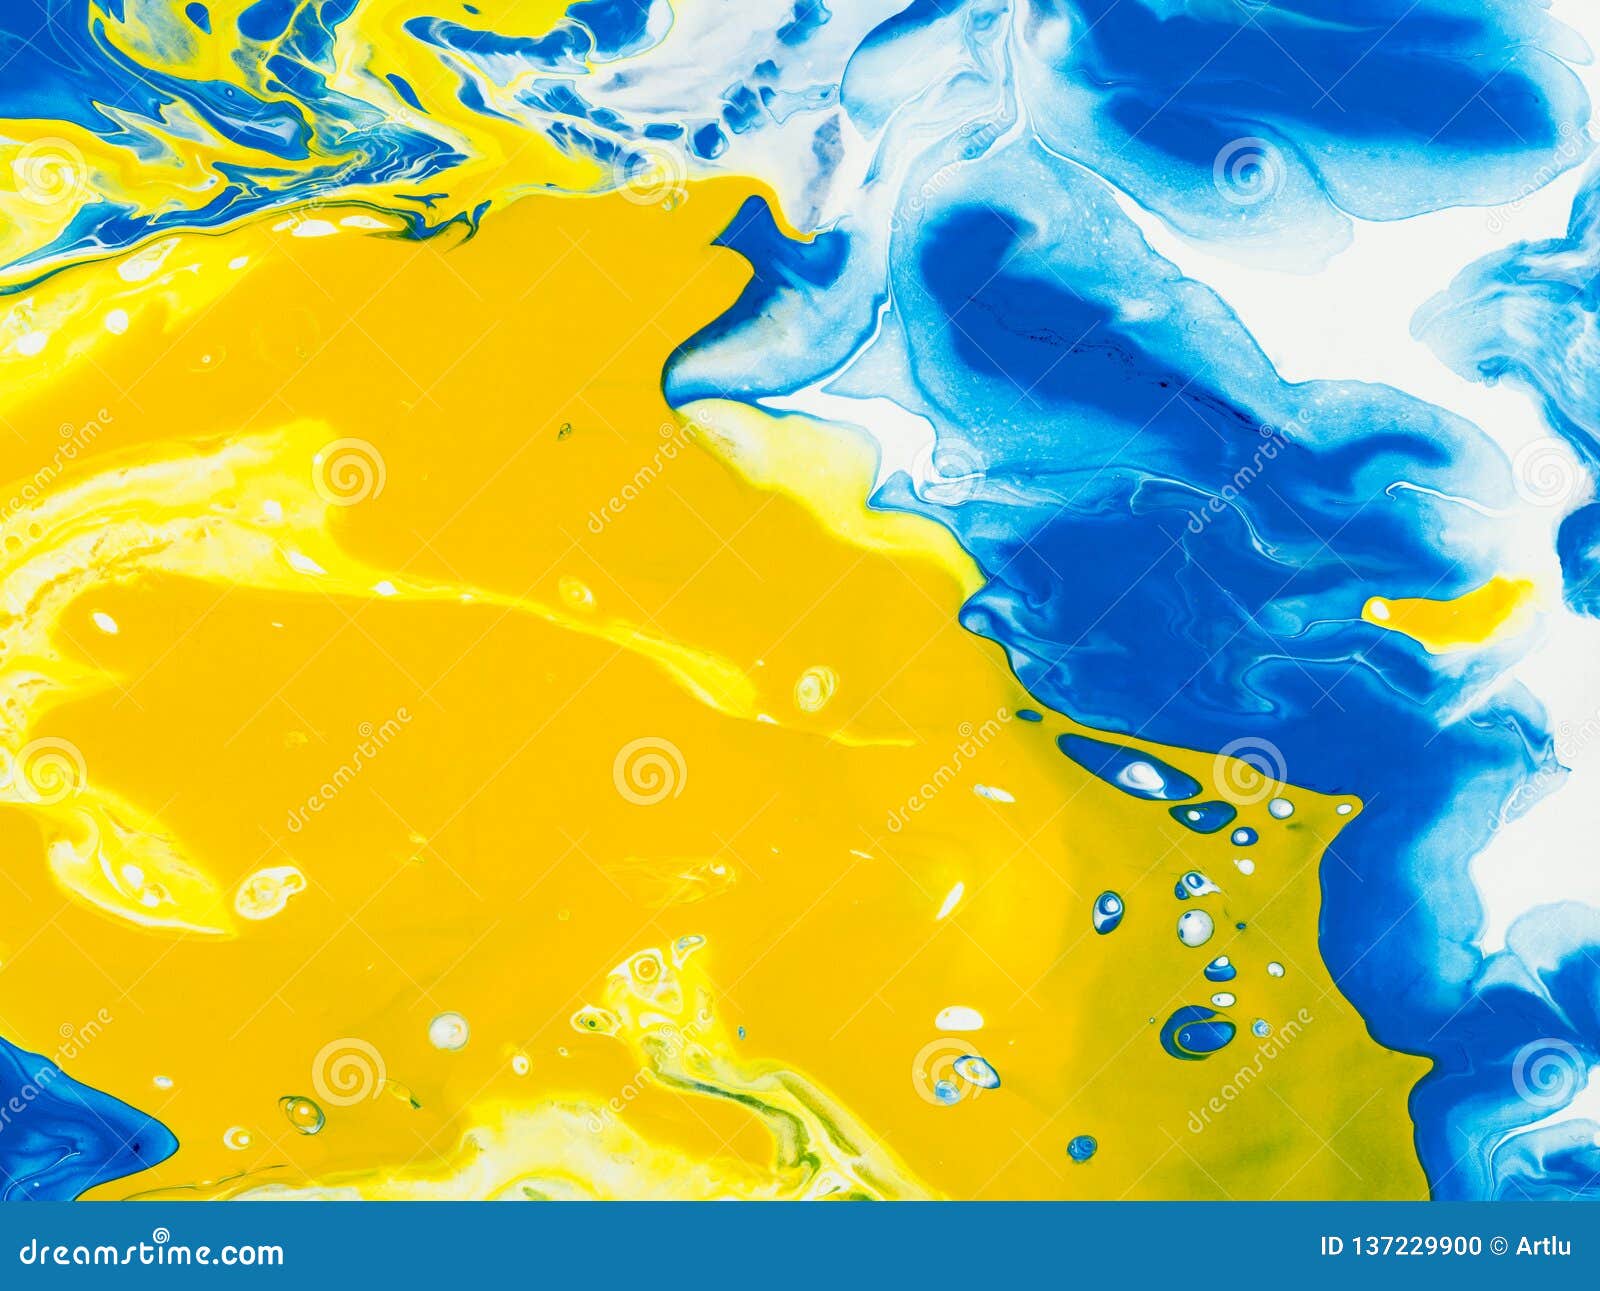 Blue and Yellow Creative Abstract Hand Painted Background, Marble ...